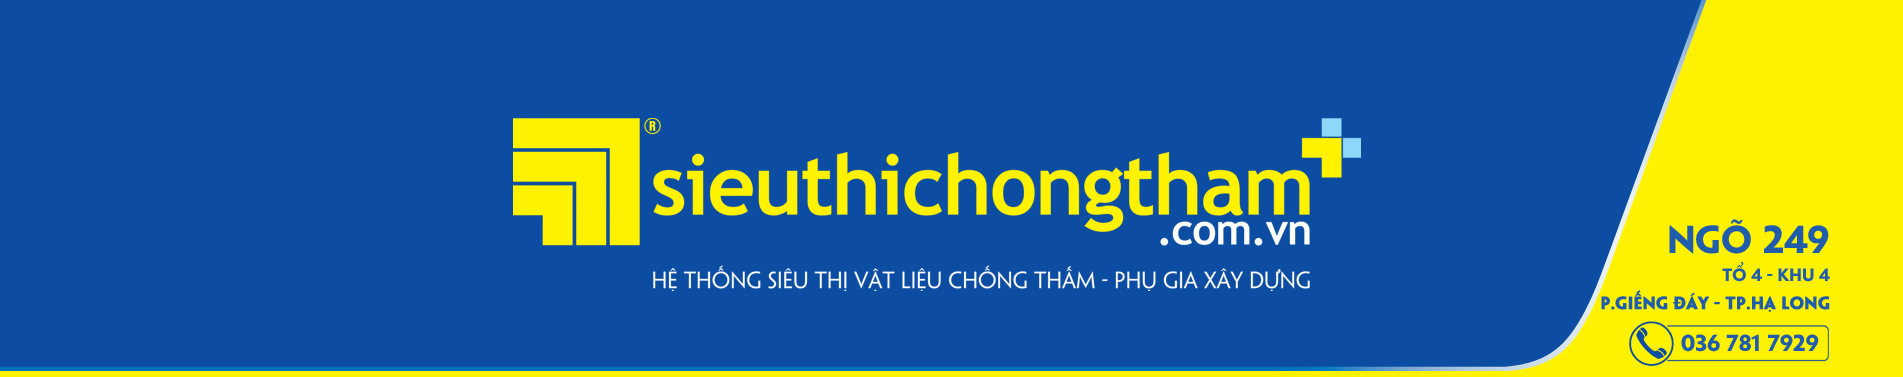 Tuan Anh Banner